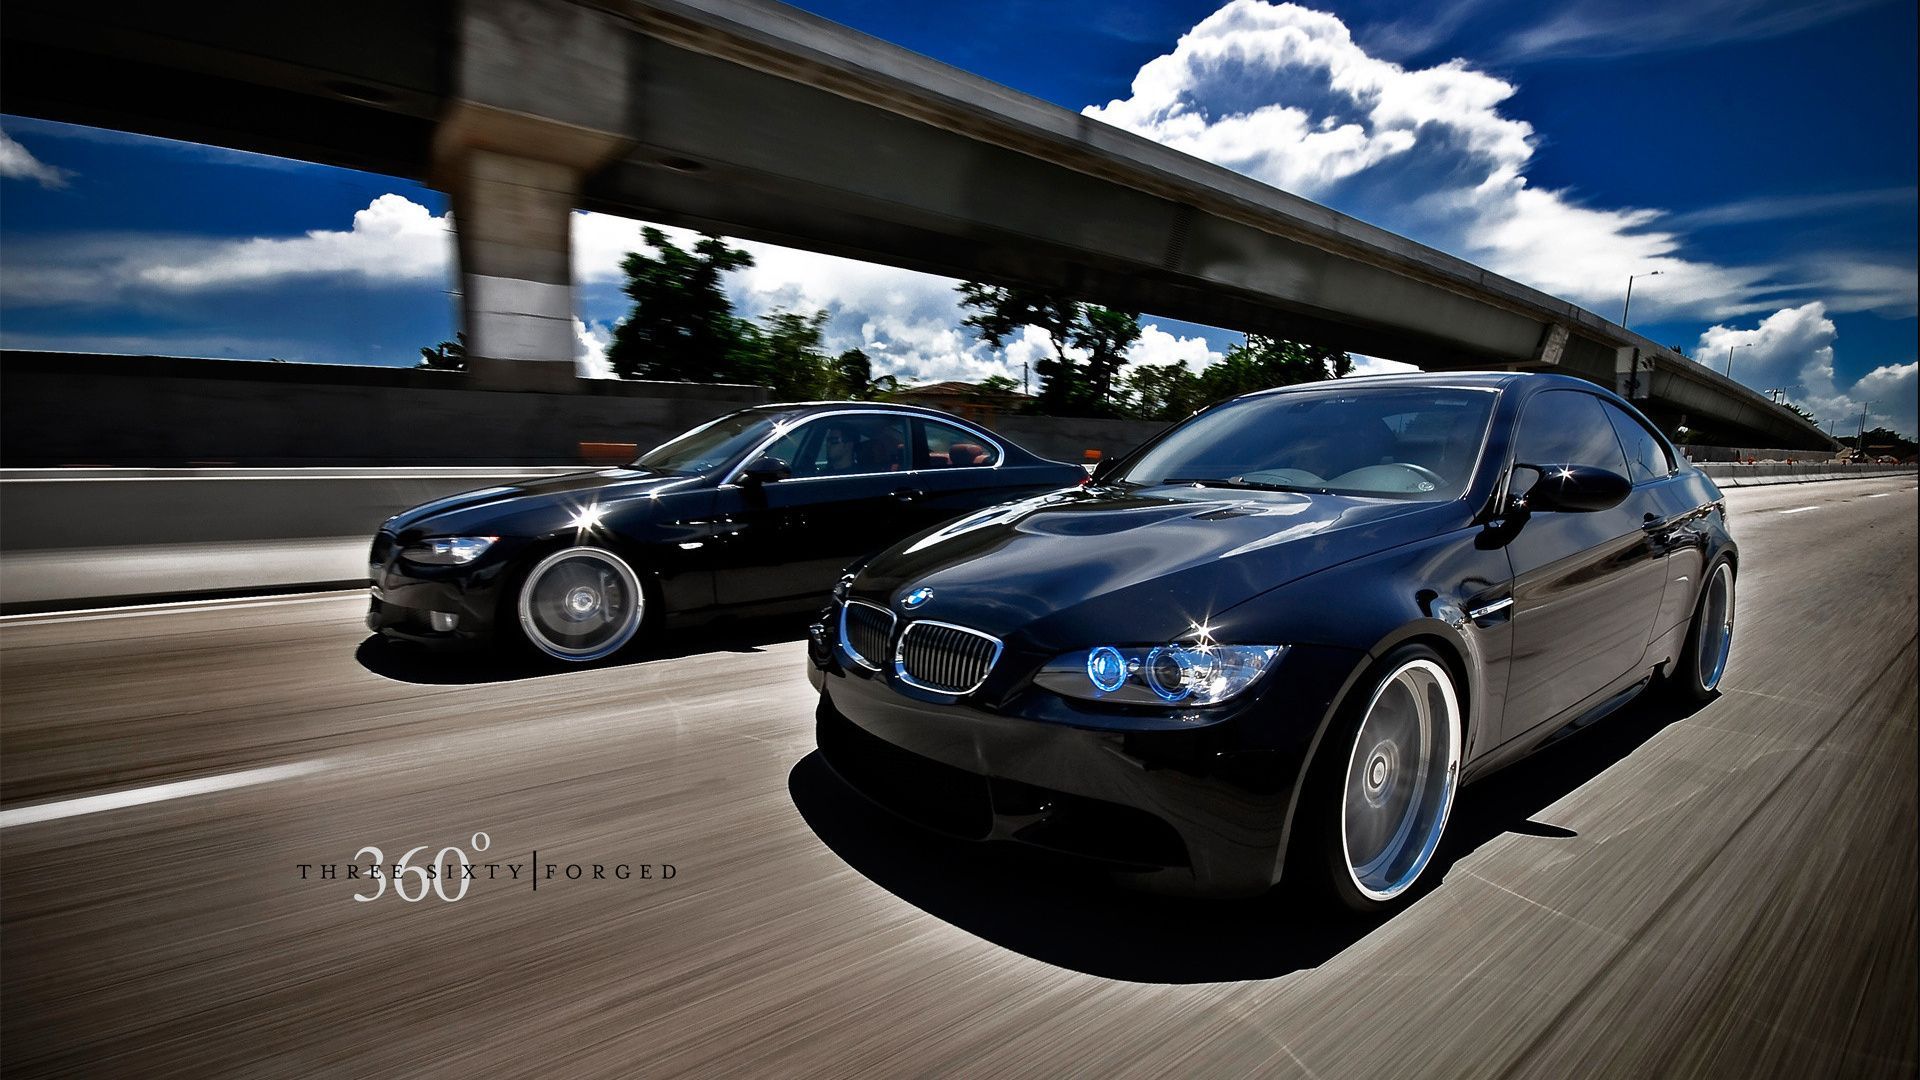 360 Forged Bmw wallpaper 181013